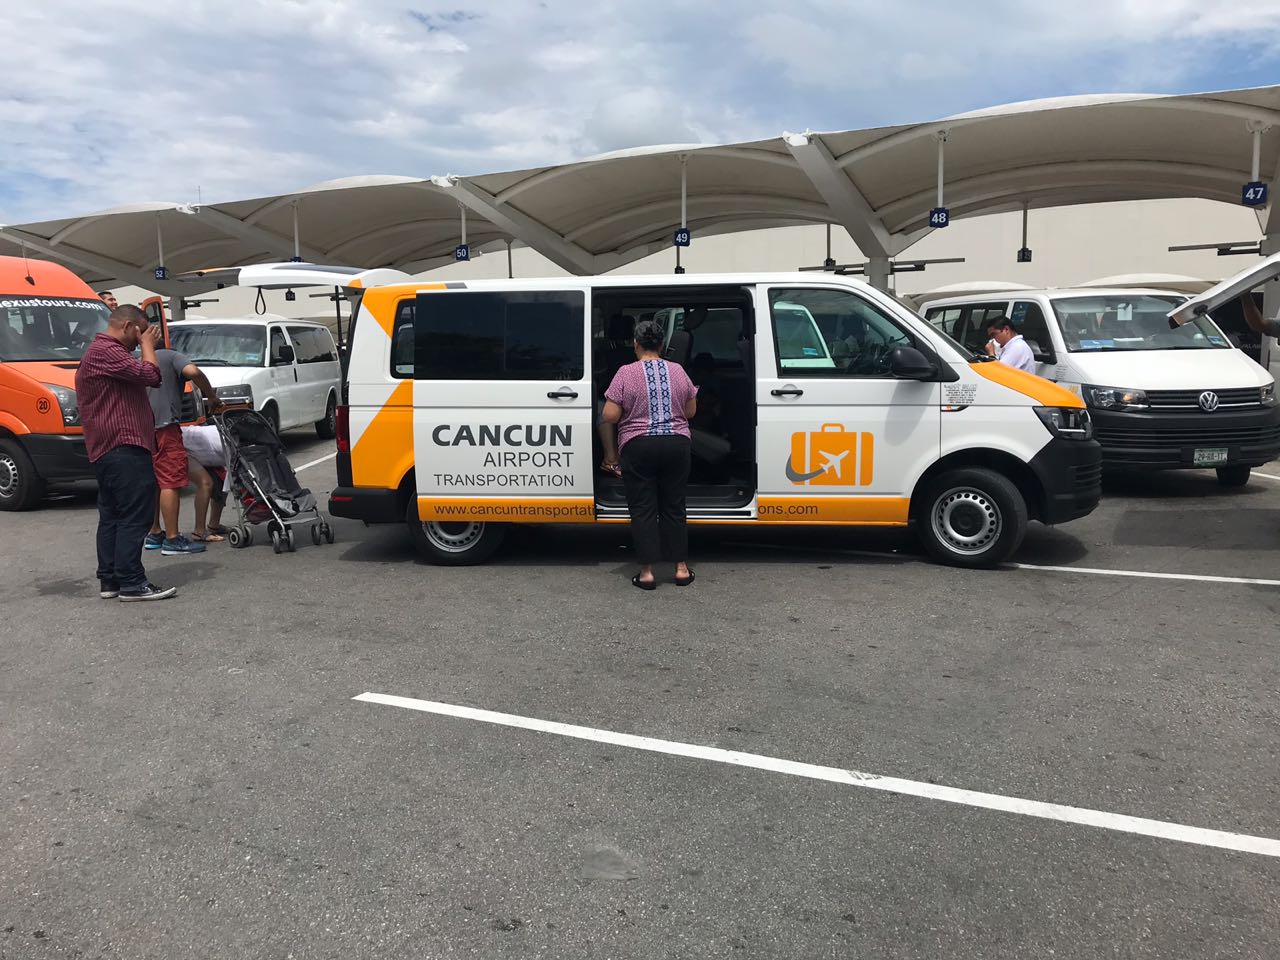 Family being picked up at Cancun Airport by Private Transfer